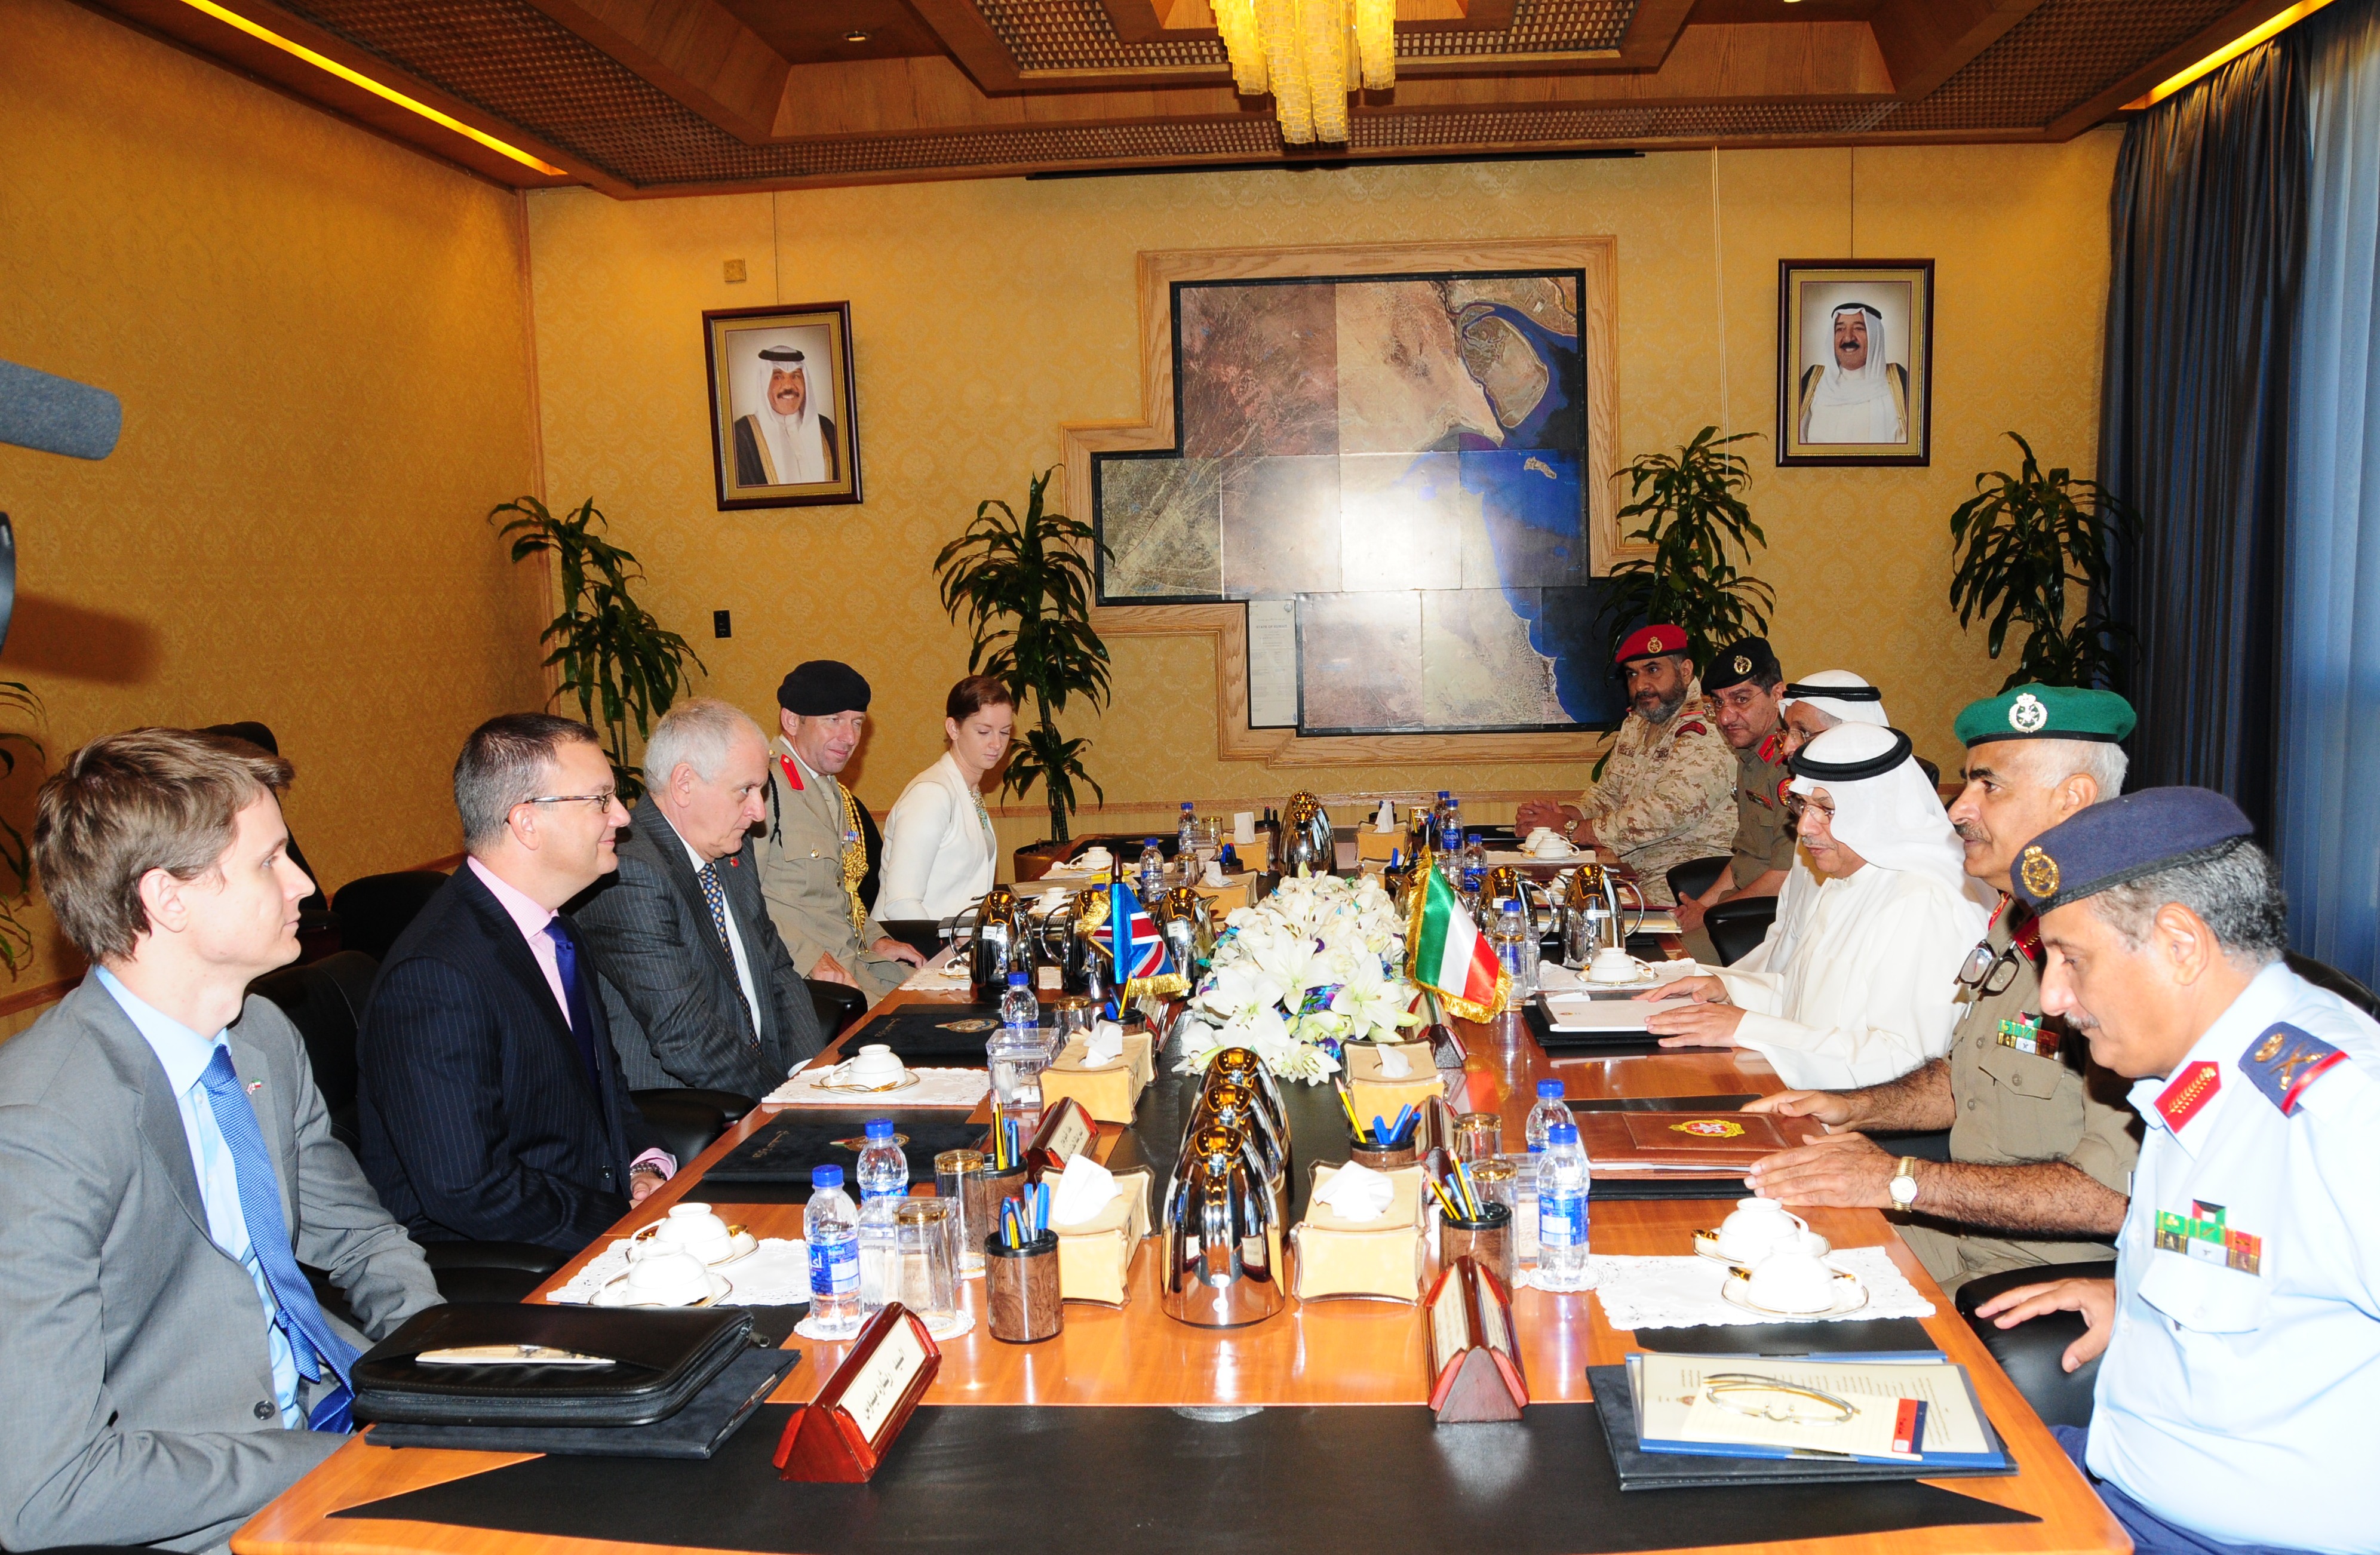 Deputy Prime Minister and Minister of Defense Sheikh Khaled Al-Jarrah Al-Sabah discussed common issues with Richard Paniguian, the visiting Head of the UK Trade and Investment Defence and Security Organisation